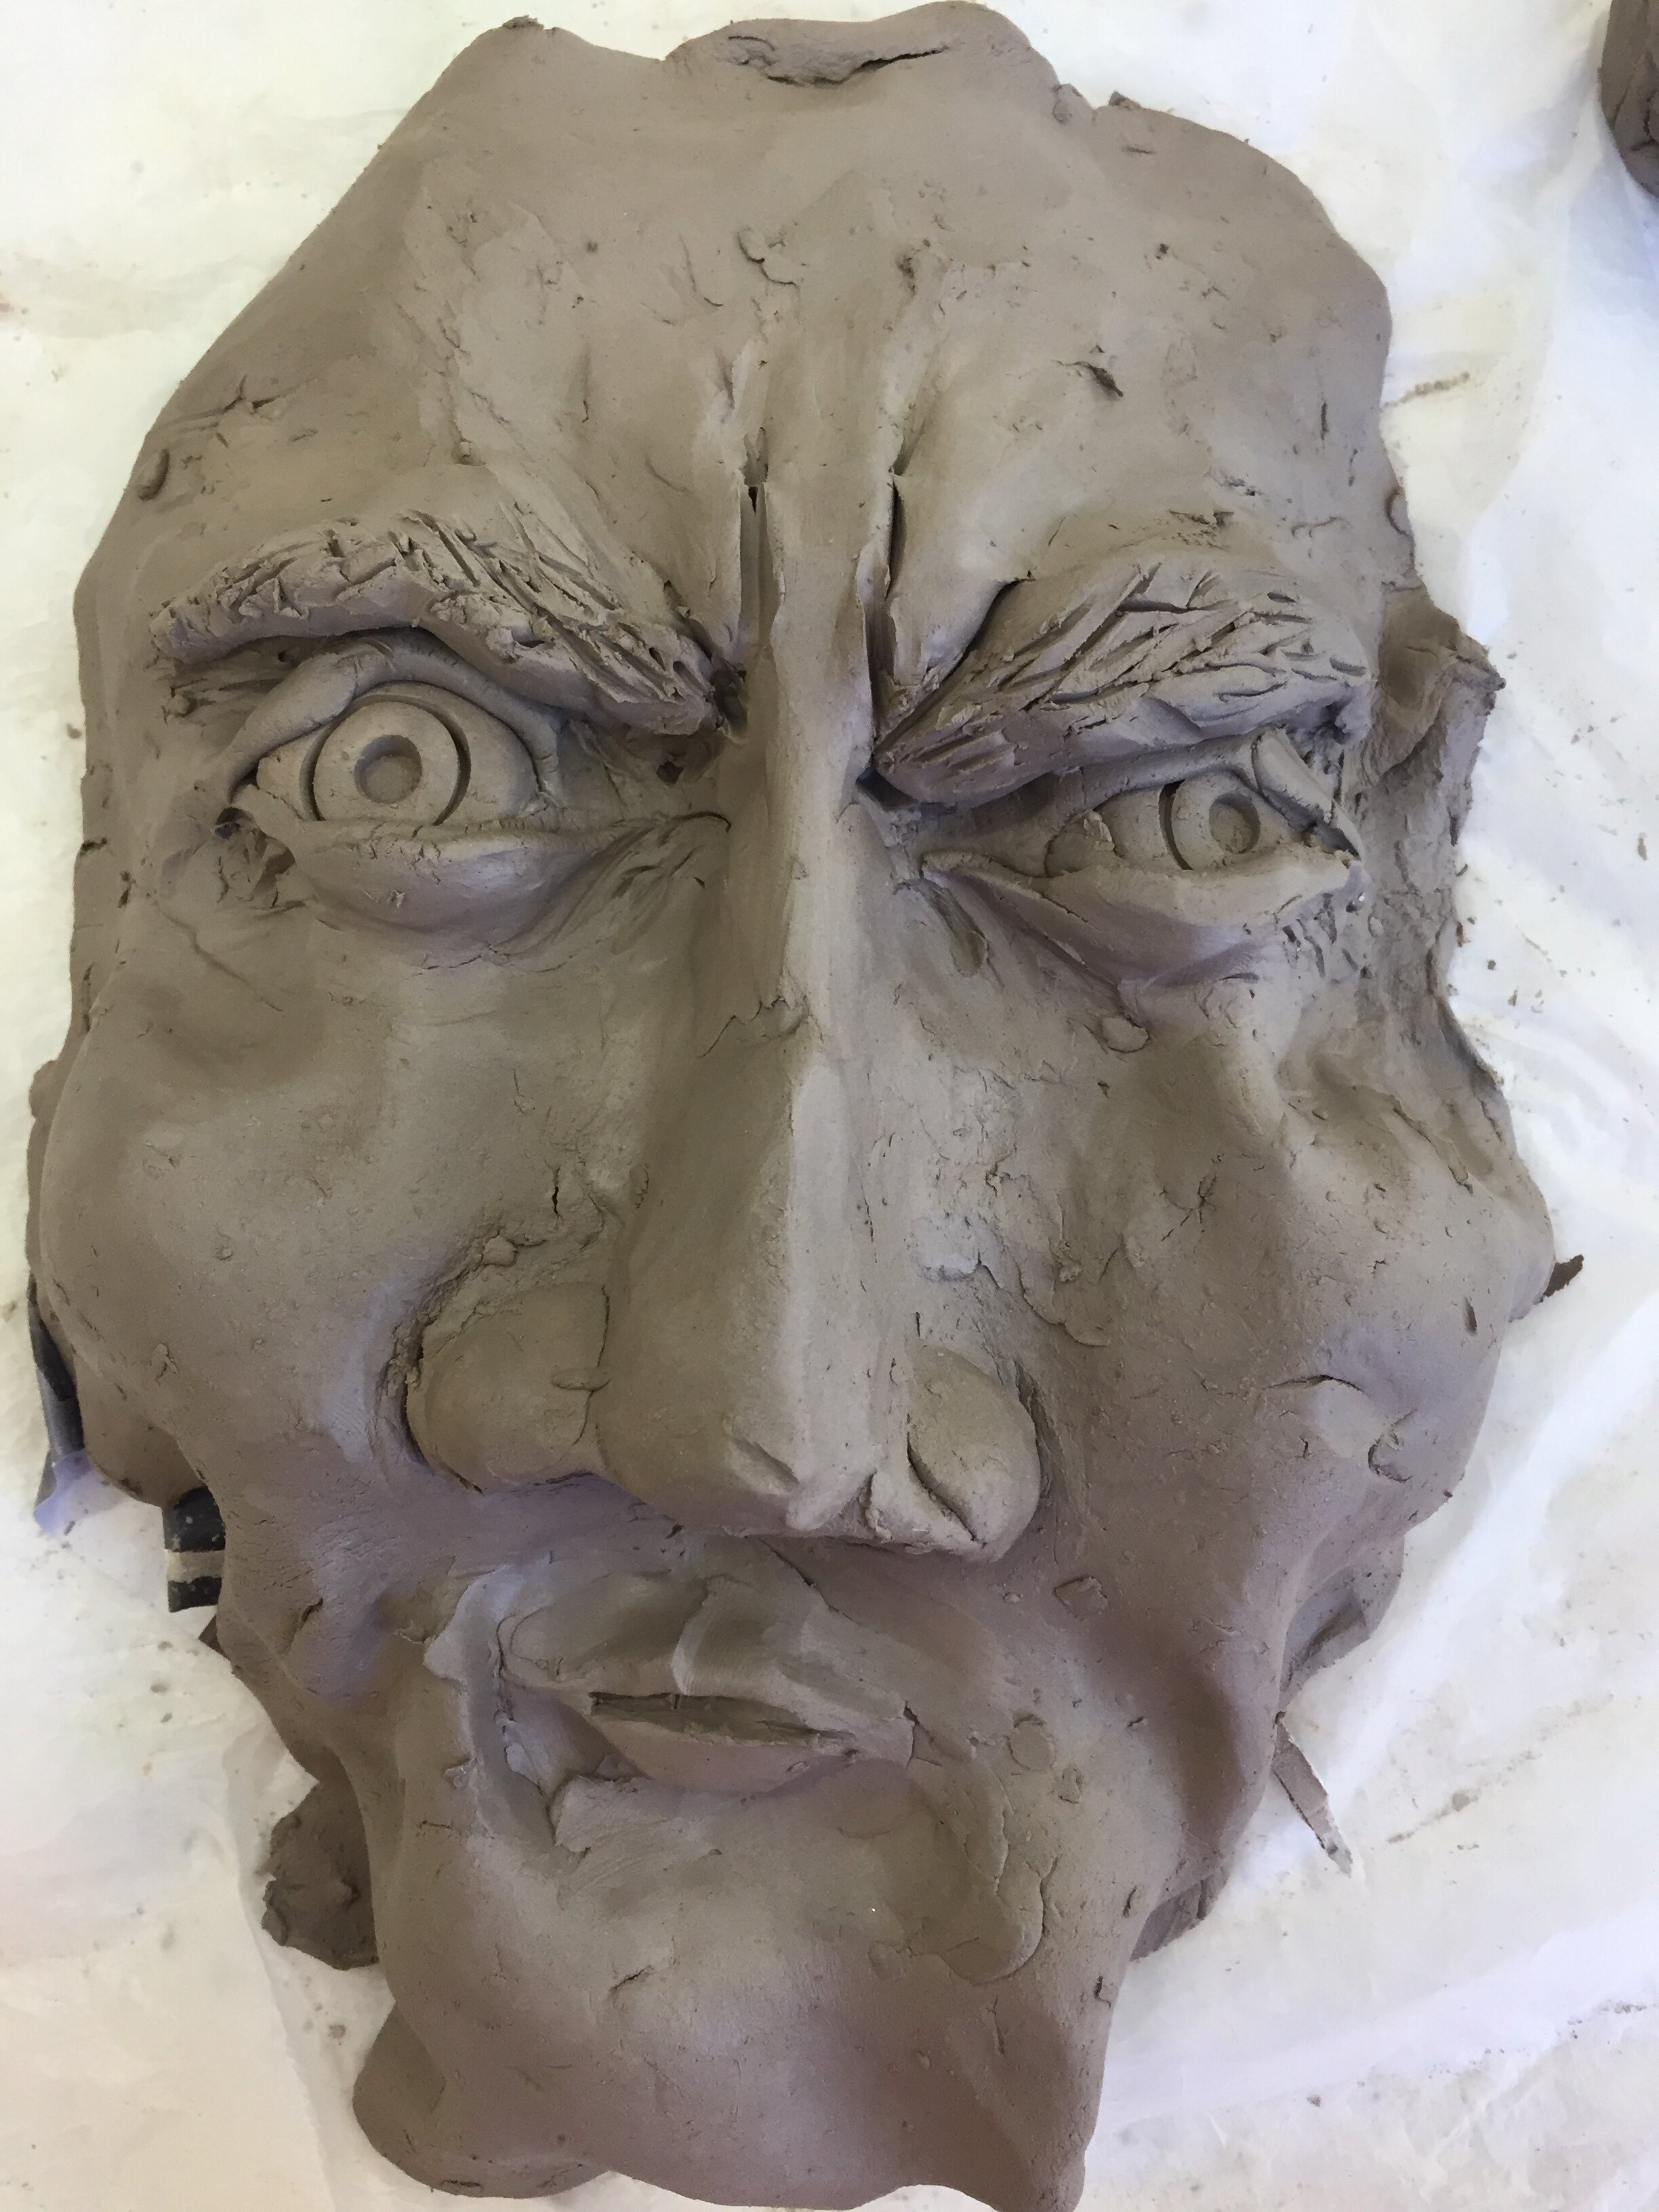 Professional Development Activity Away Day, Perth, Drawing and Clay, Anger Expression